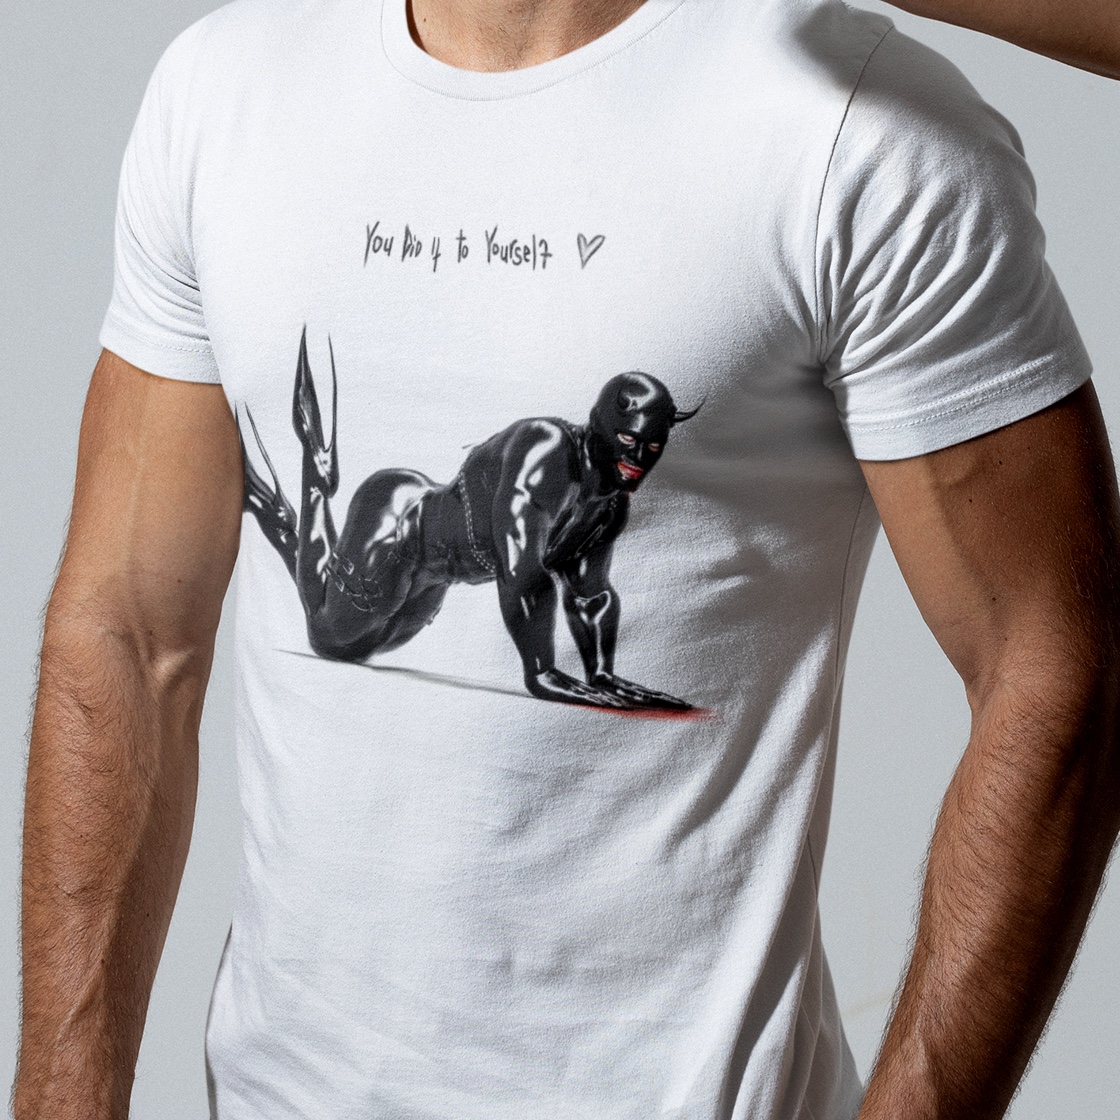 Featured image for “You did it to yourself - Unisex t-shirt”